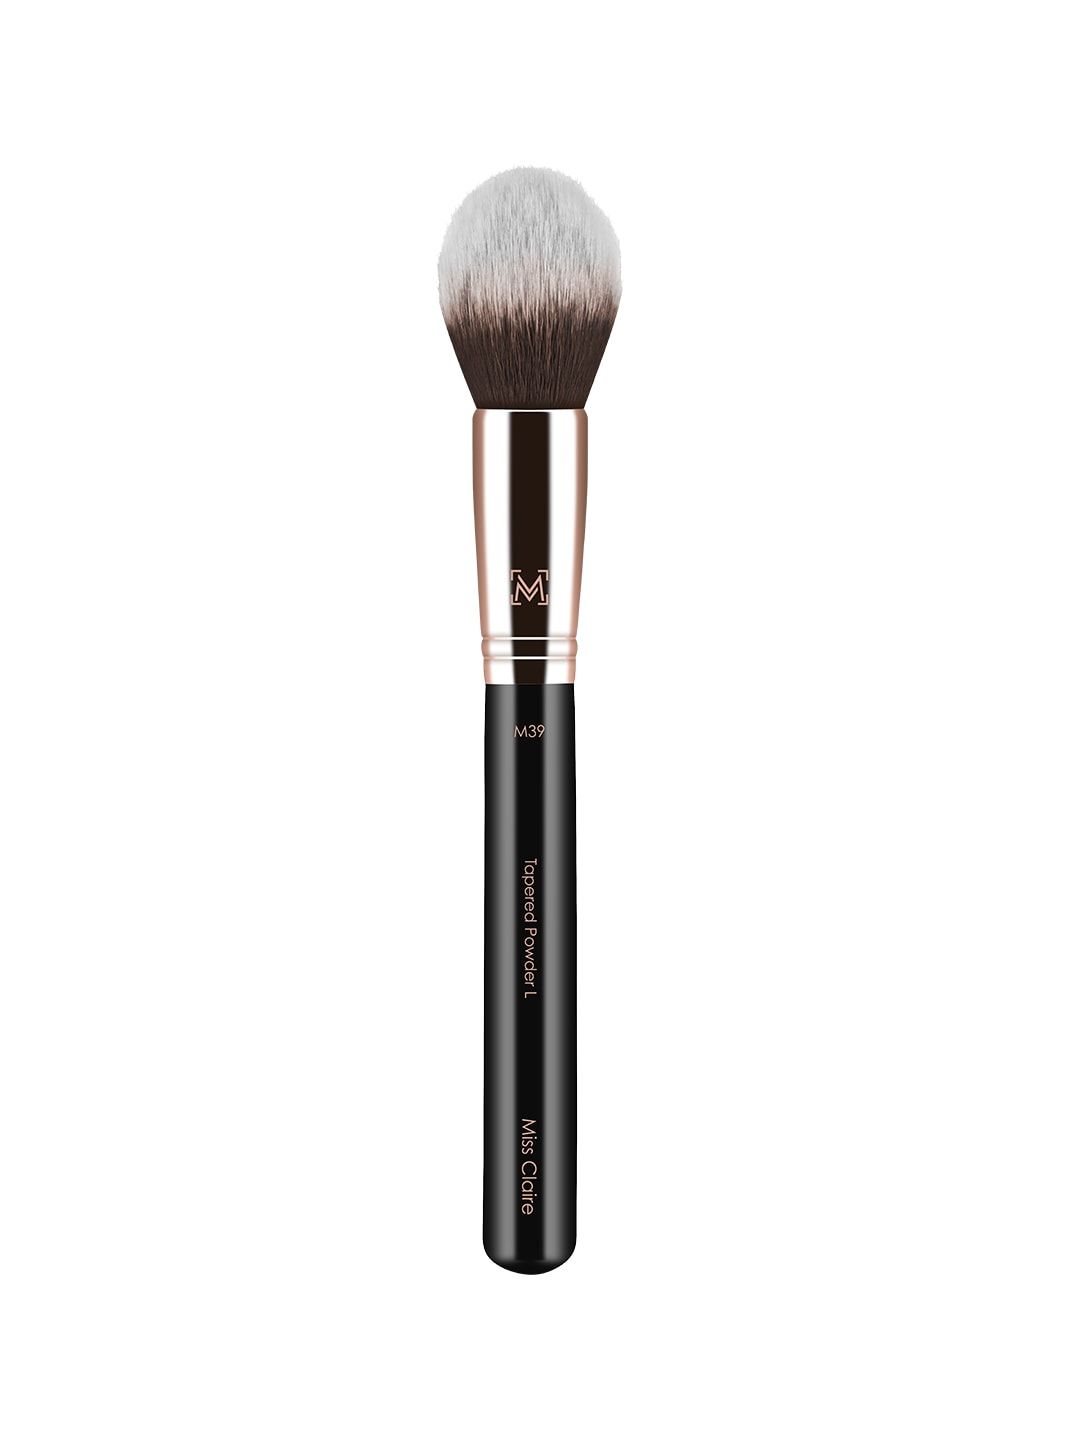 Miss Claire M39 - Tapered Face Powder Brush (L) - Rose Gold-Toned & Black Price in India